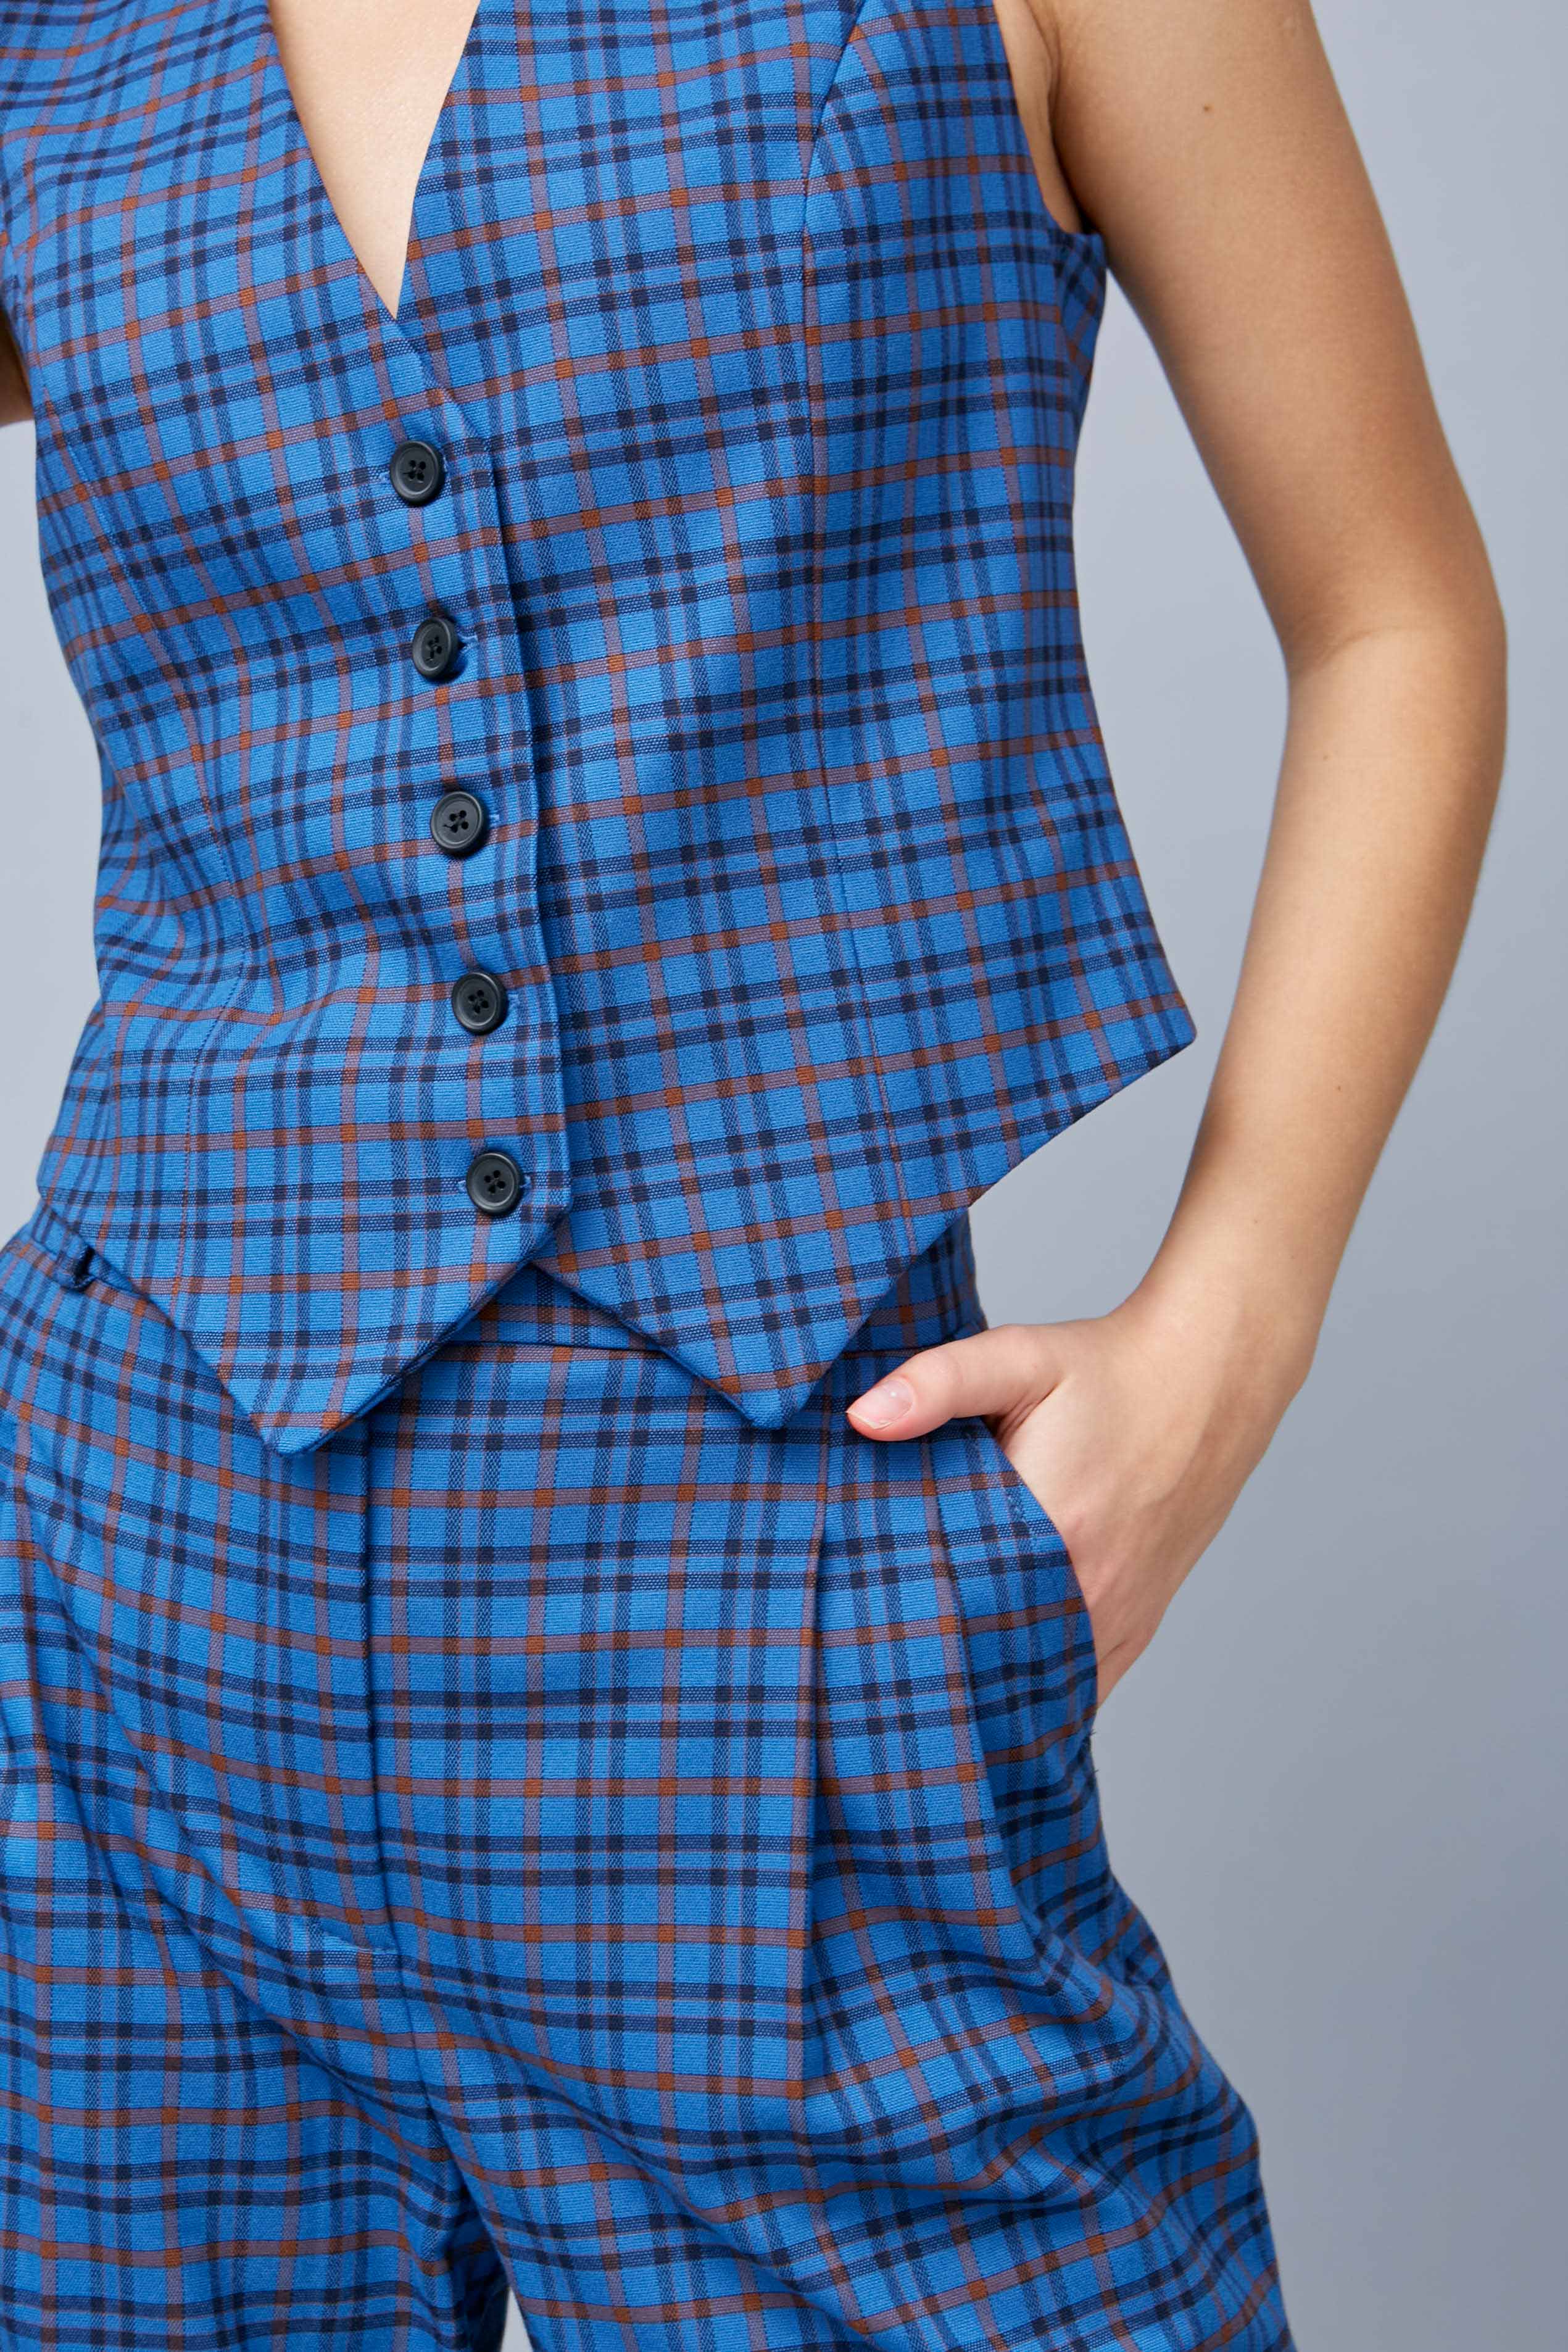 Vest with buttons in blue check, photo 4